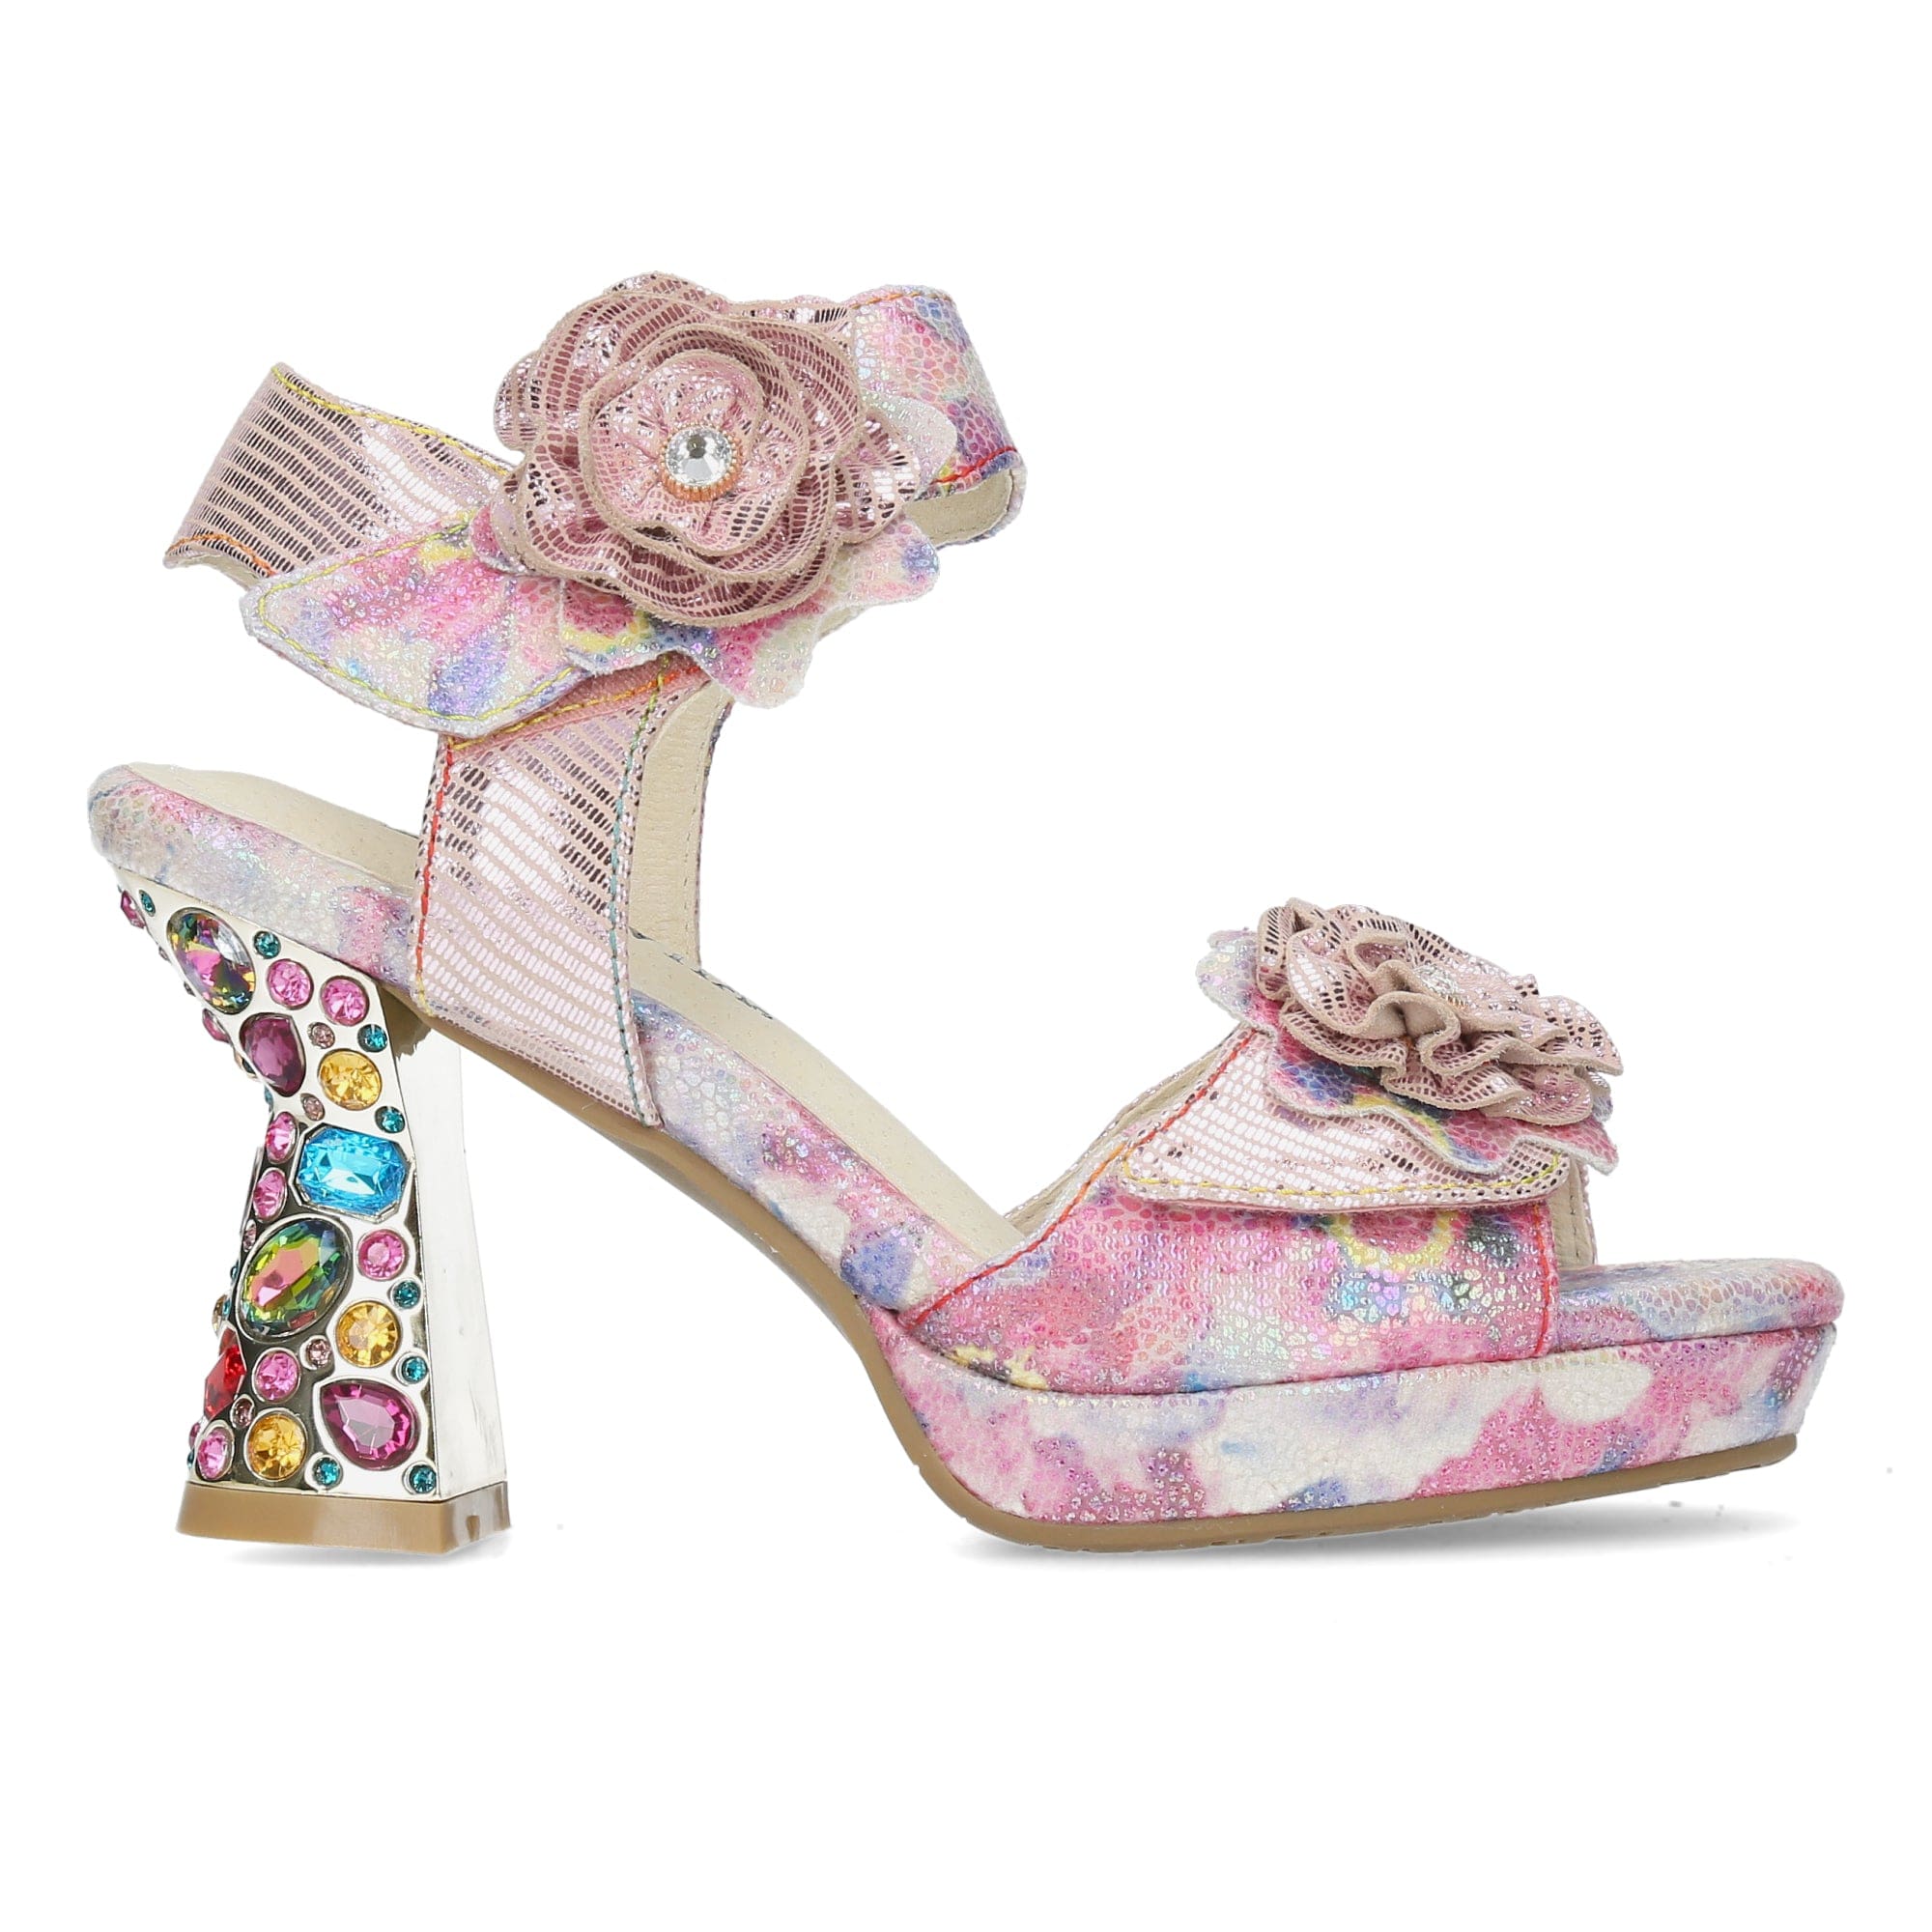 Shoe HICAO 624 - 35 / Pink - Sandal